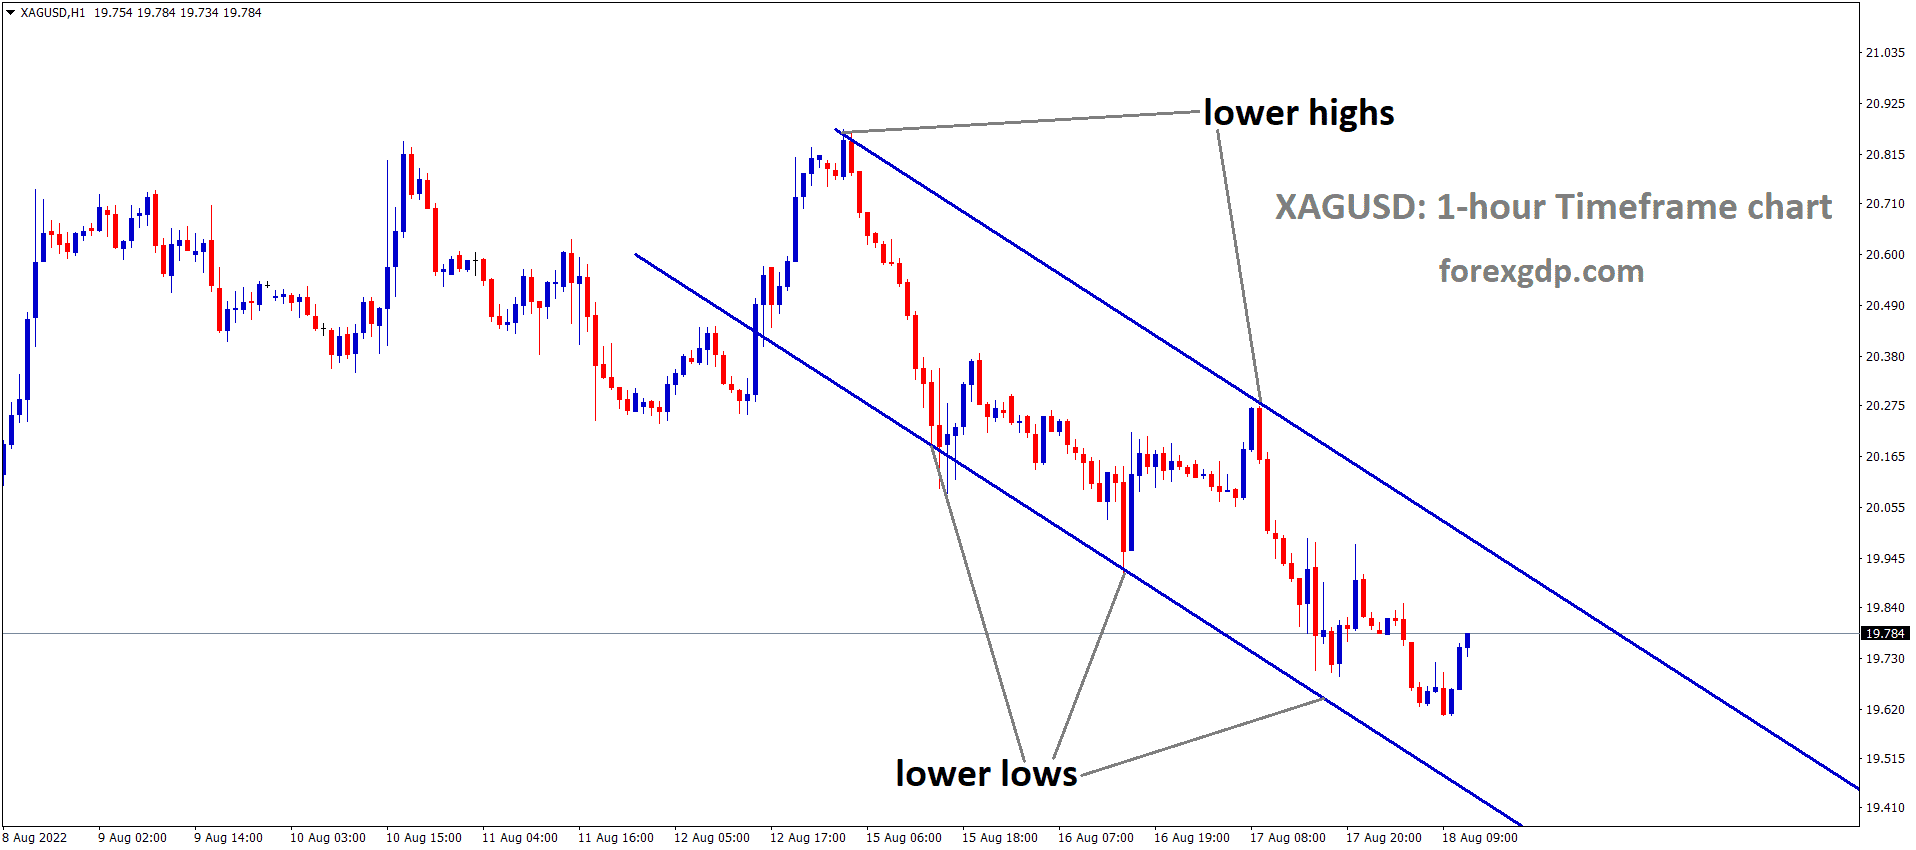 XAGUSD Silver Price is moving in the Descending channel and the market has rebounded from the Lower low area of the channel 1